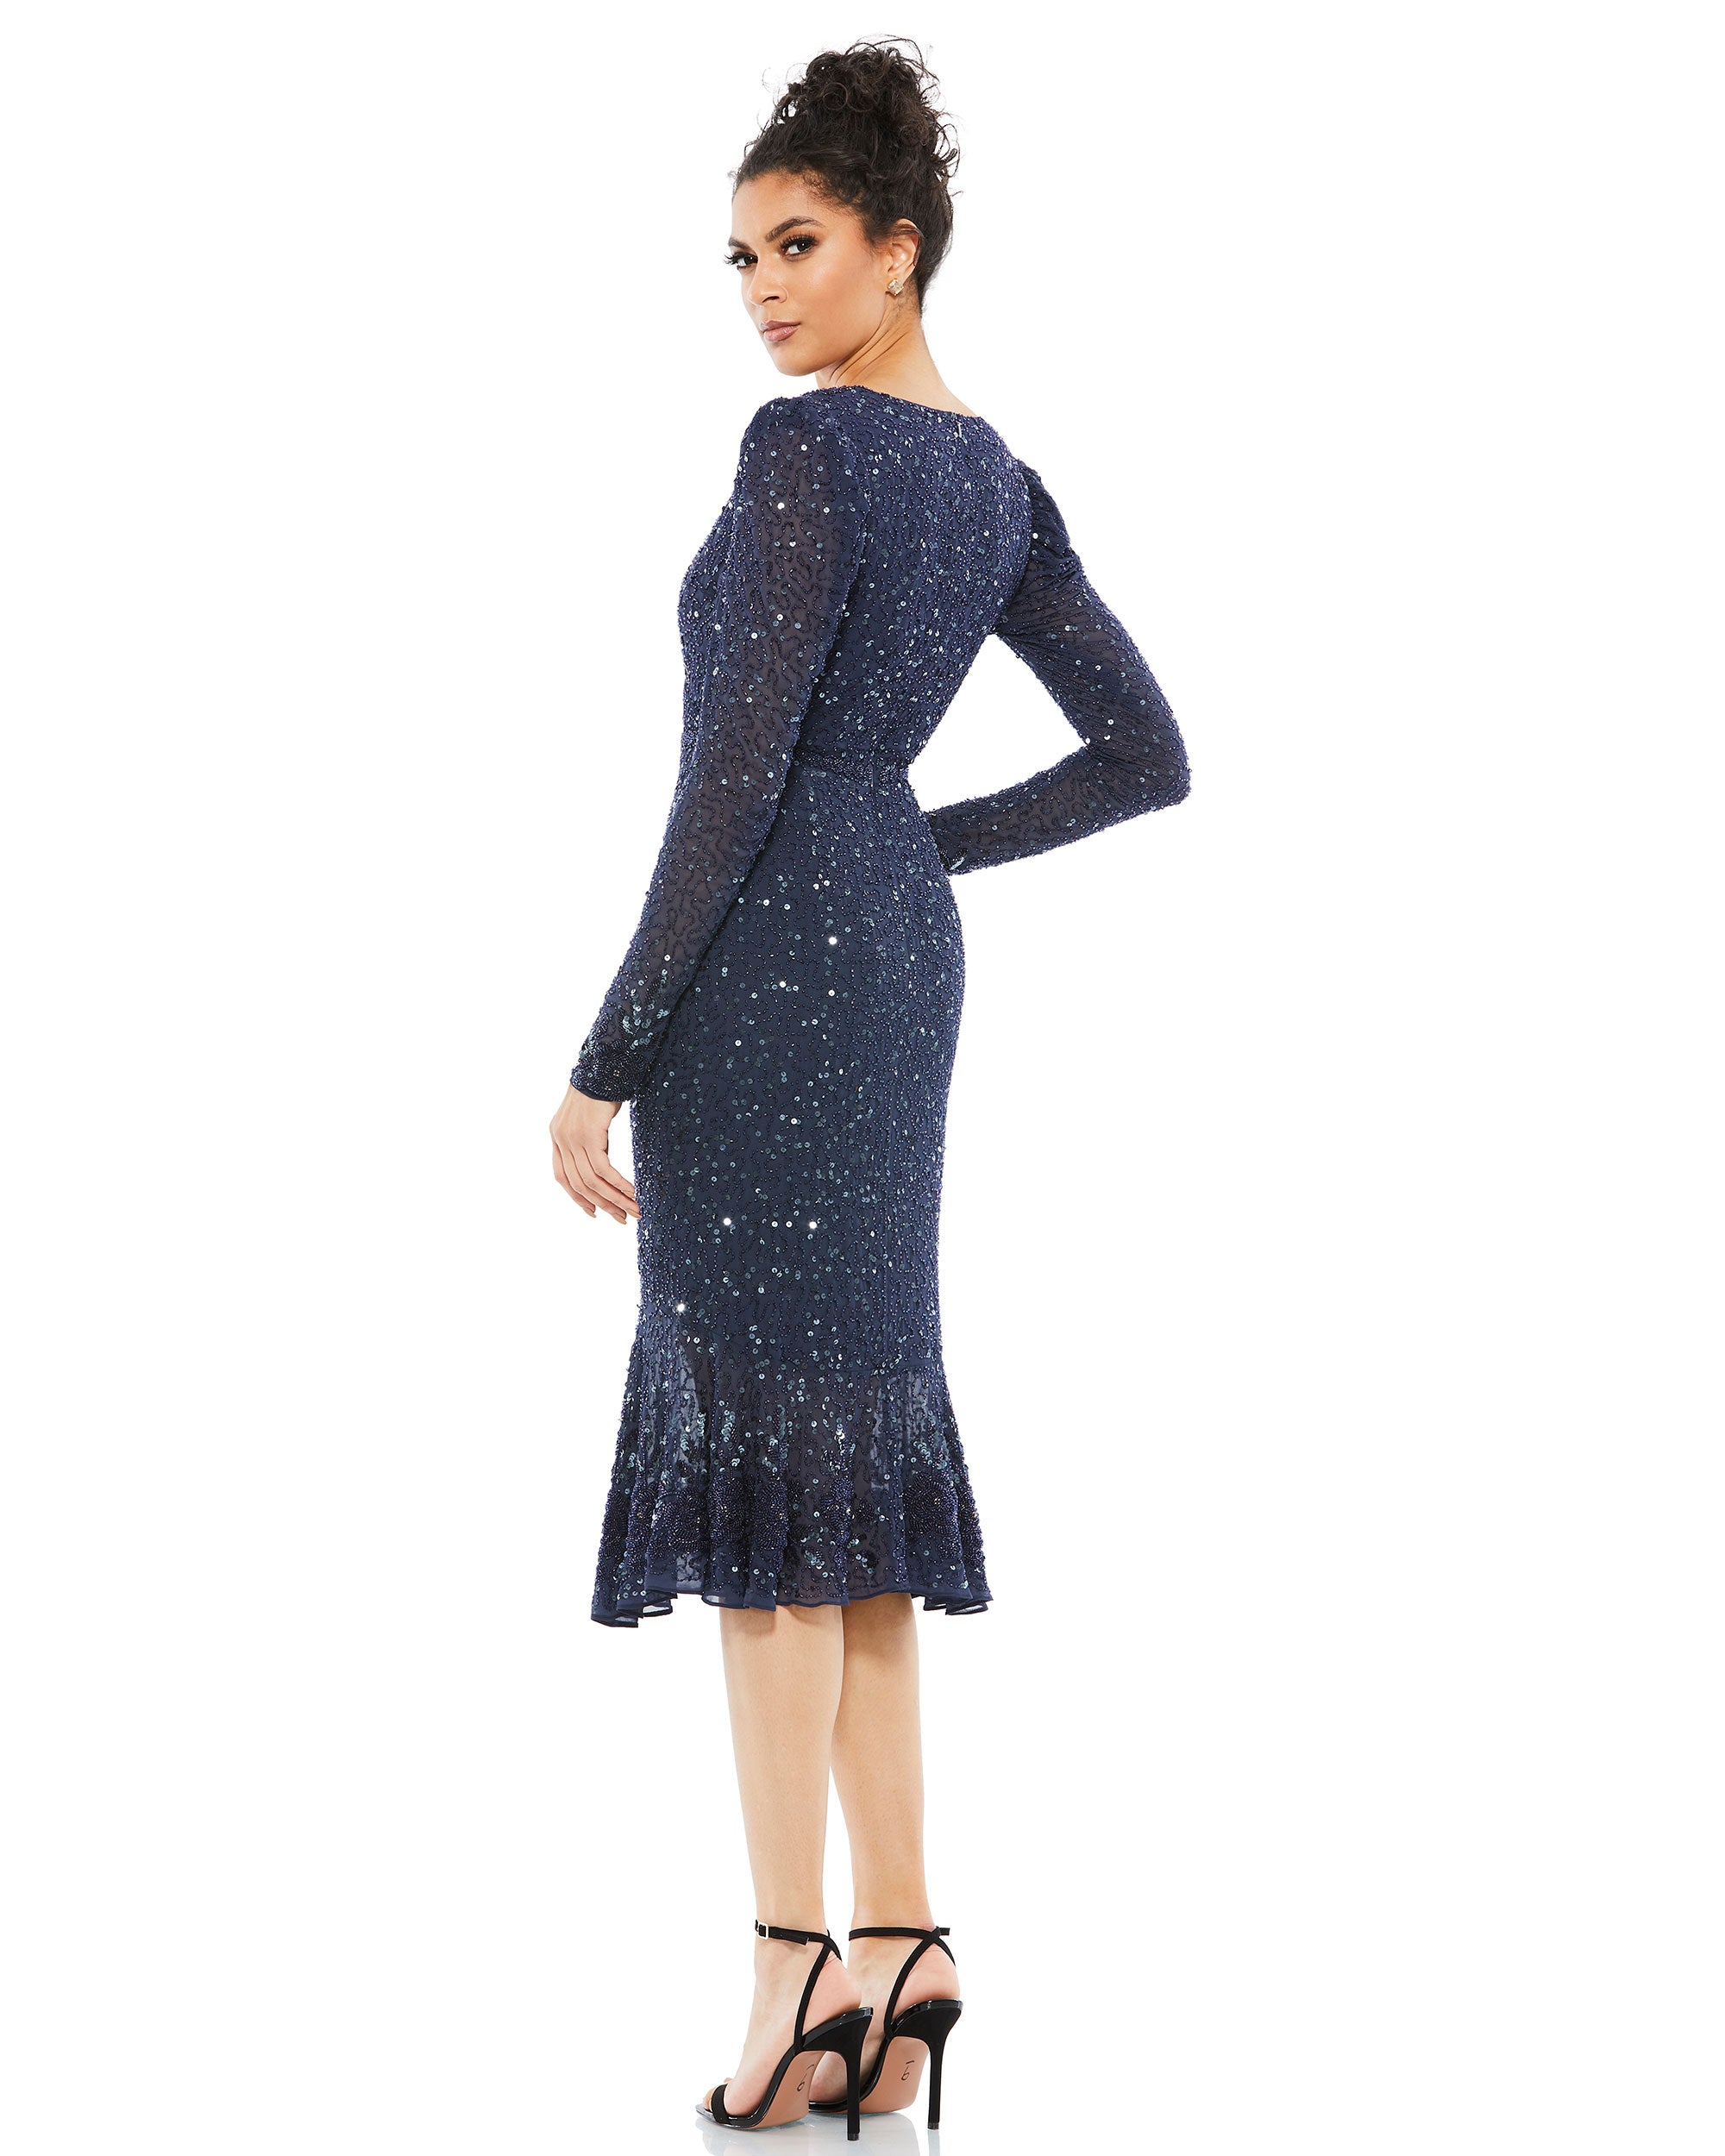 Sequin Gown with Embellished Hemline and Belt